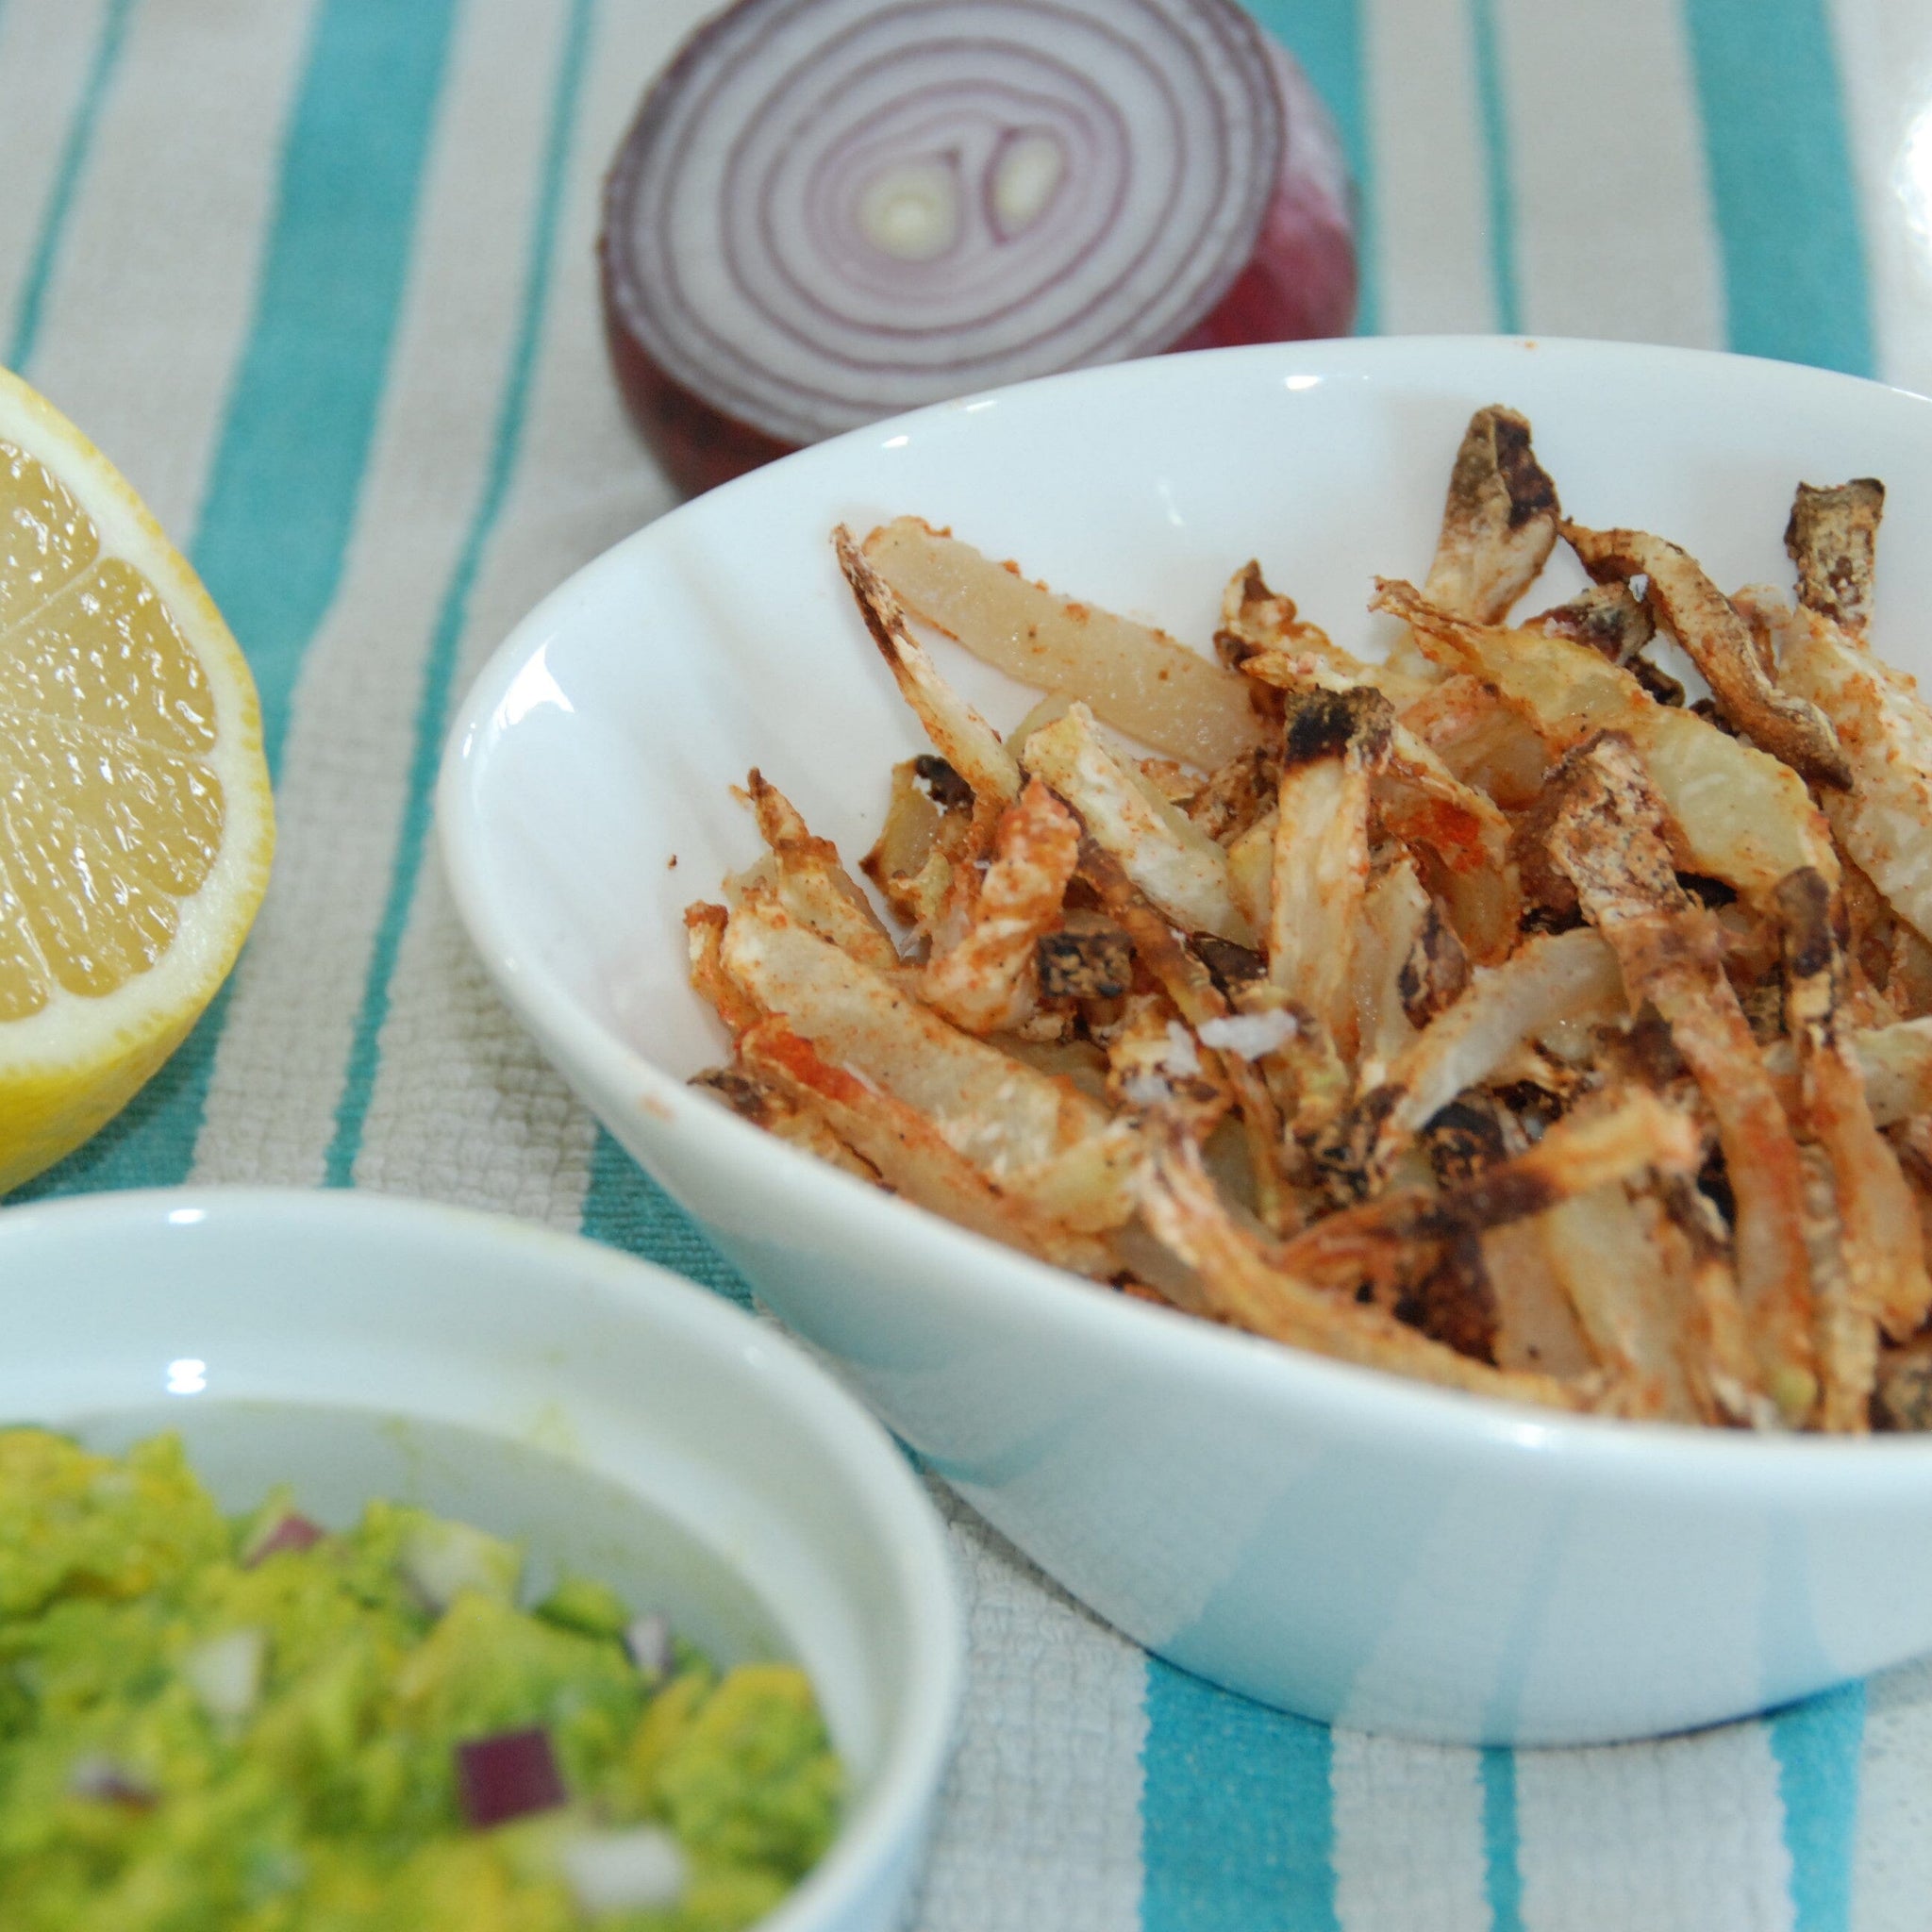 Kohlrabi Fries With Dipping Sauces - Replace Typical Fried Foods To Avoid With PCOS 